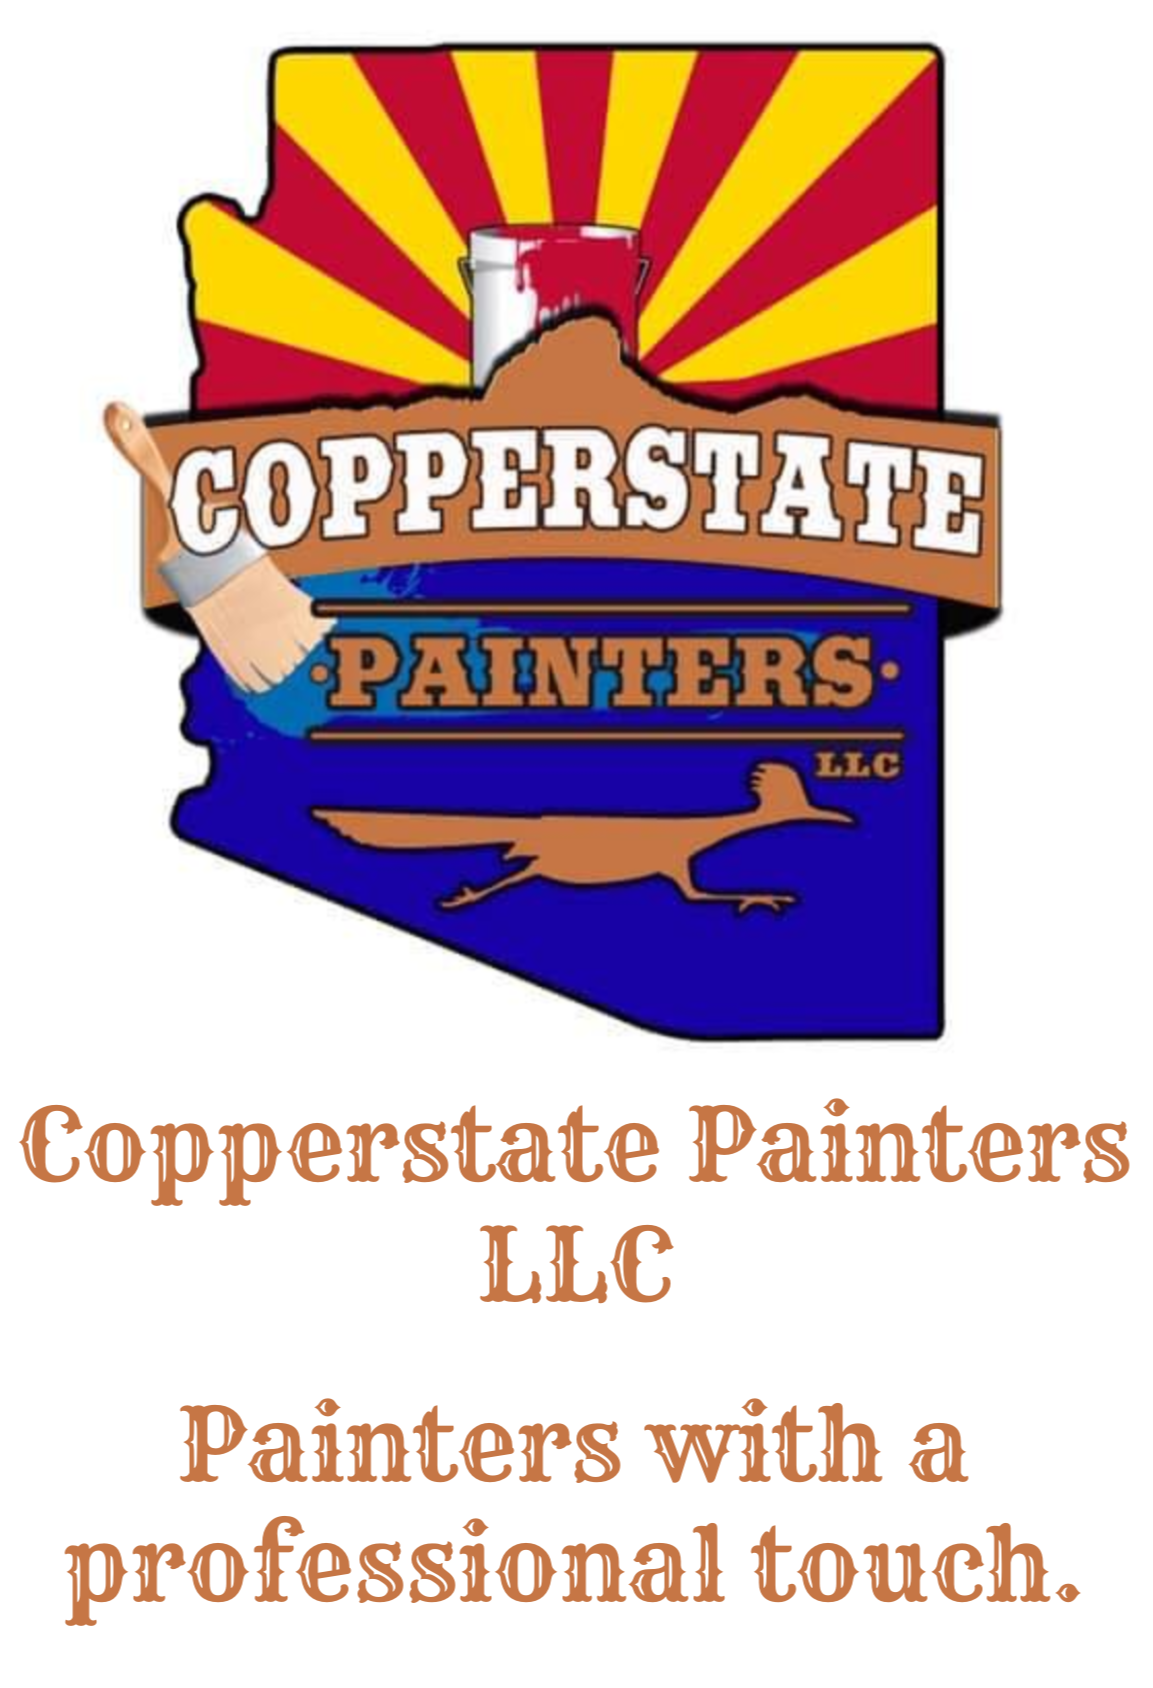 Copperstate Painters LLC